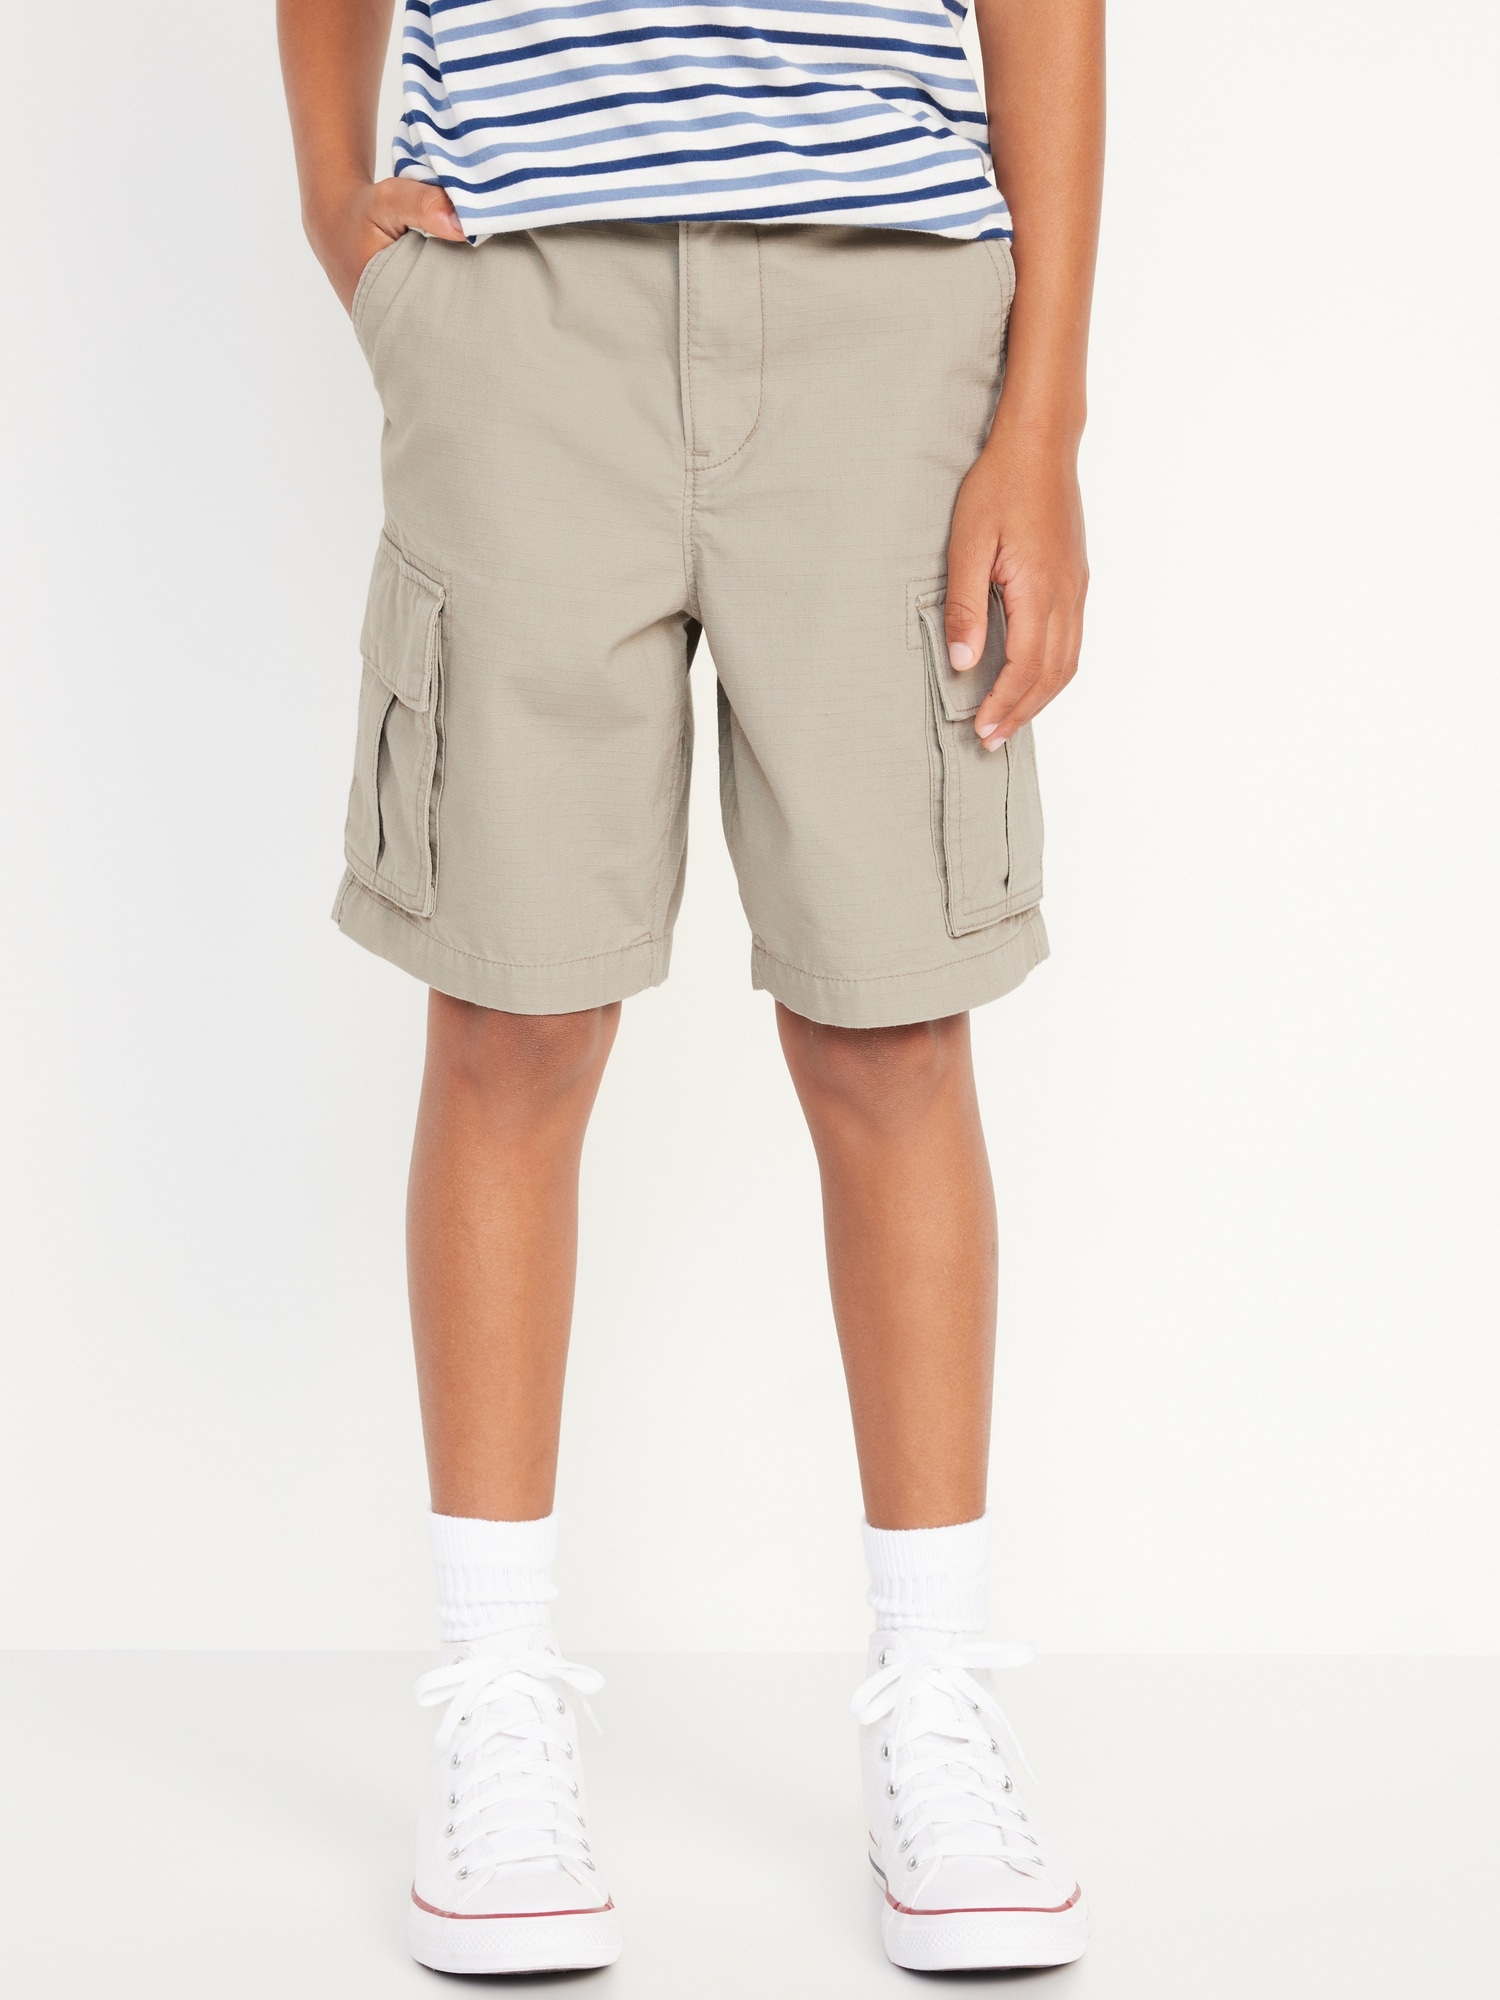 Loose Cargo Shorts for Boys (At Knee